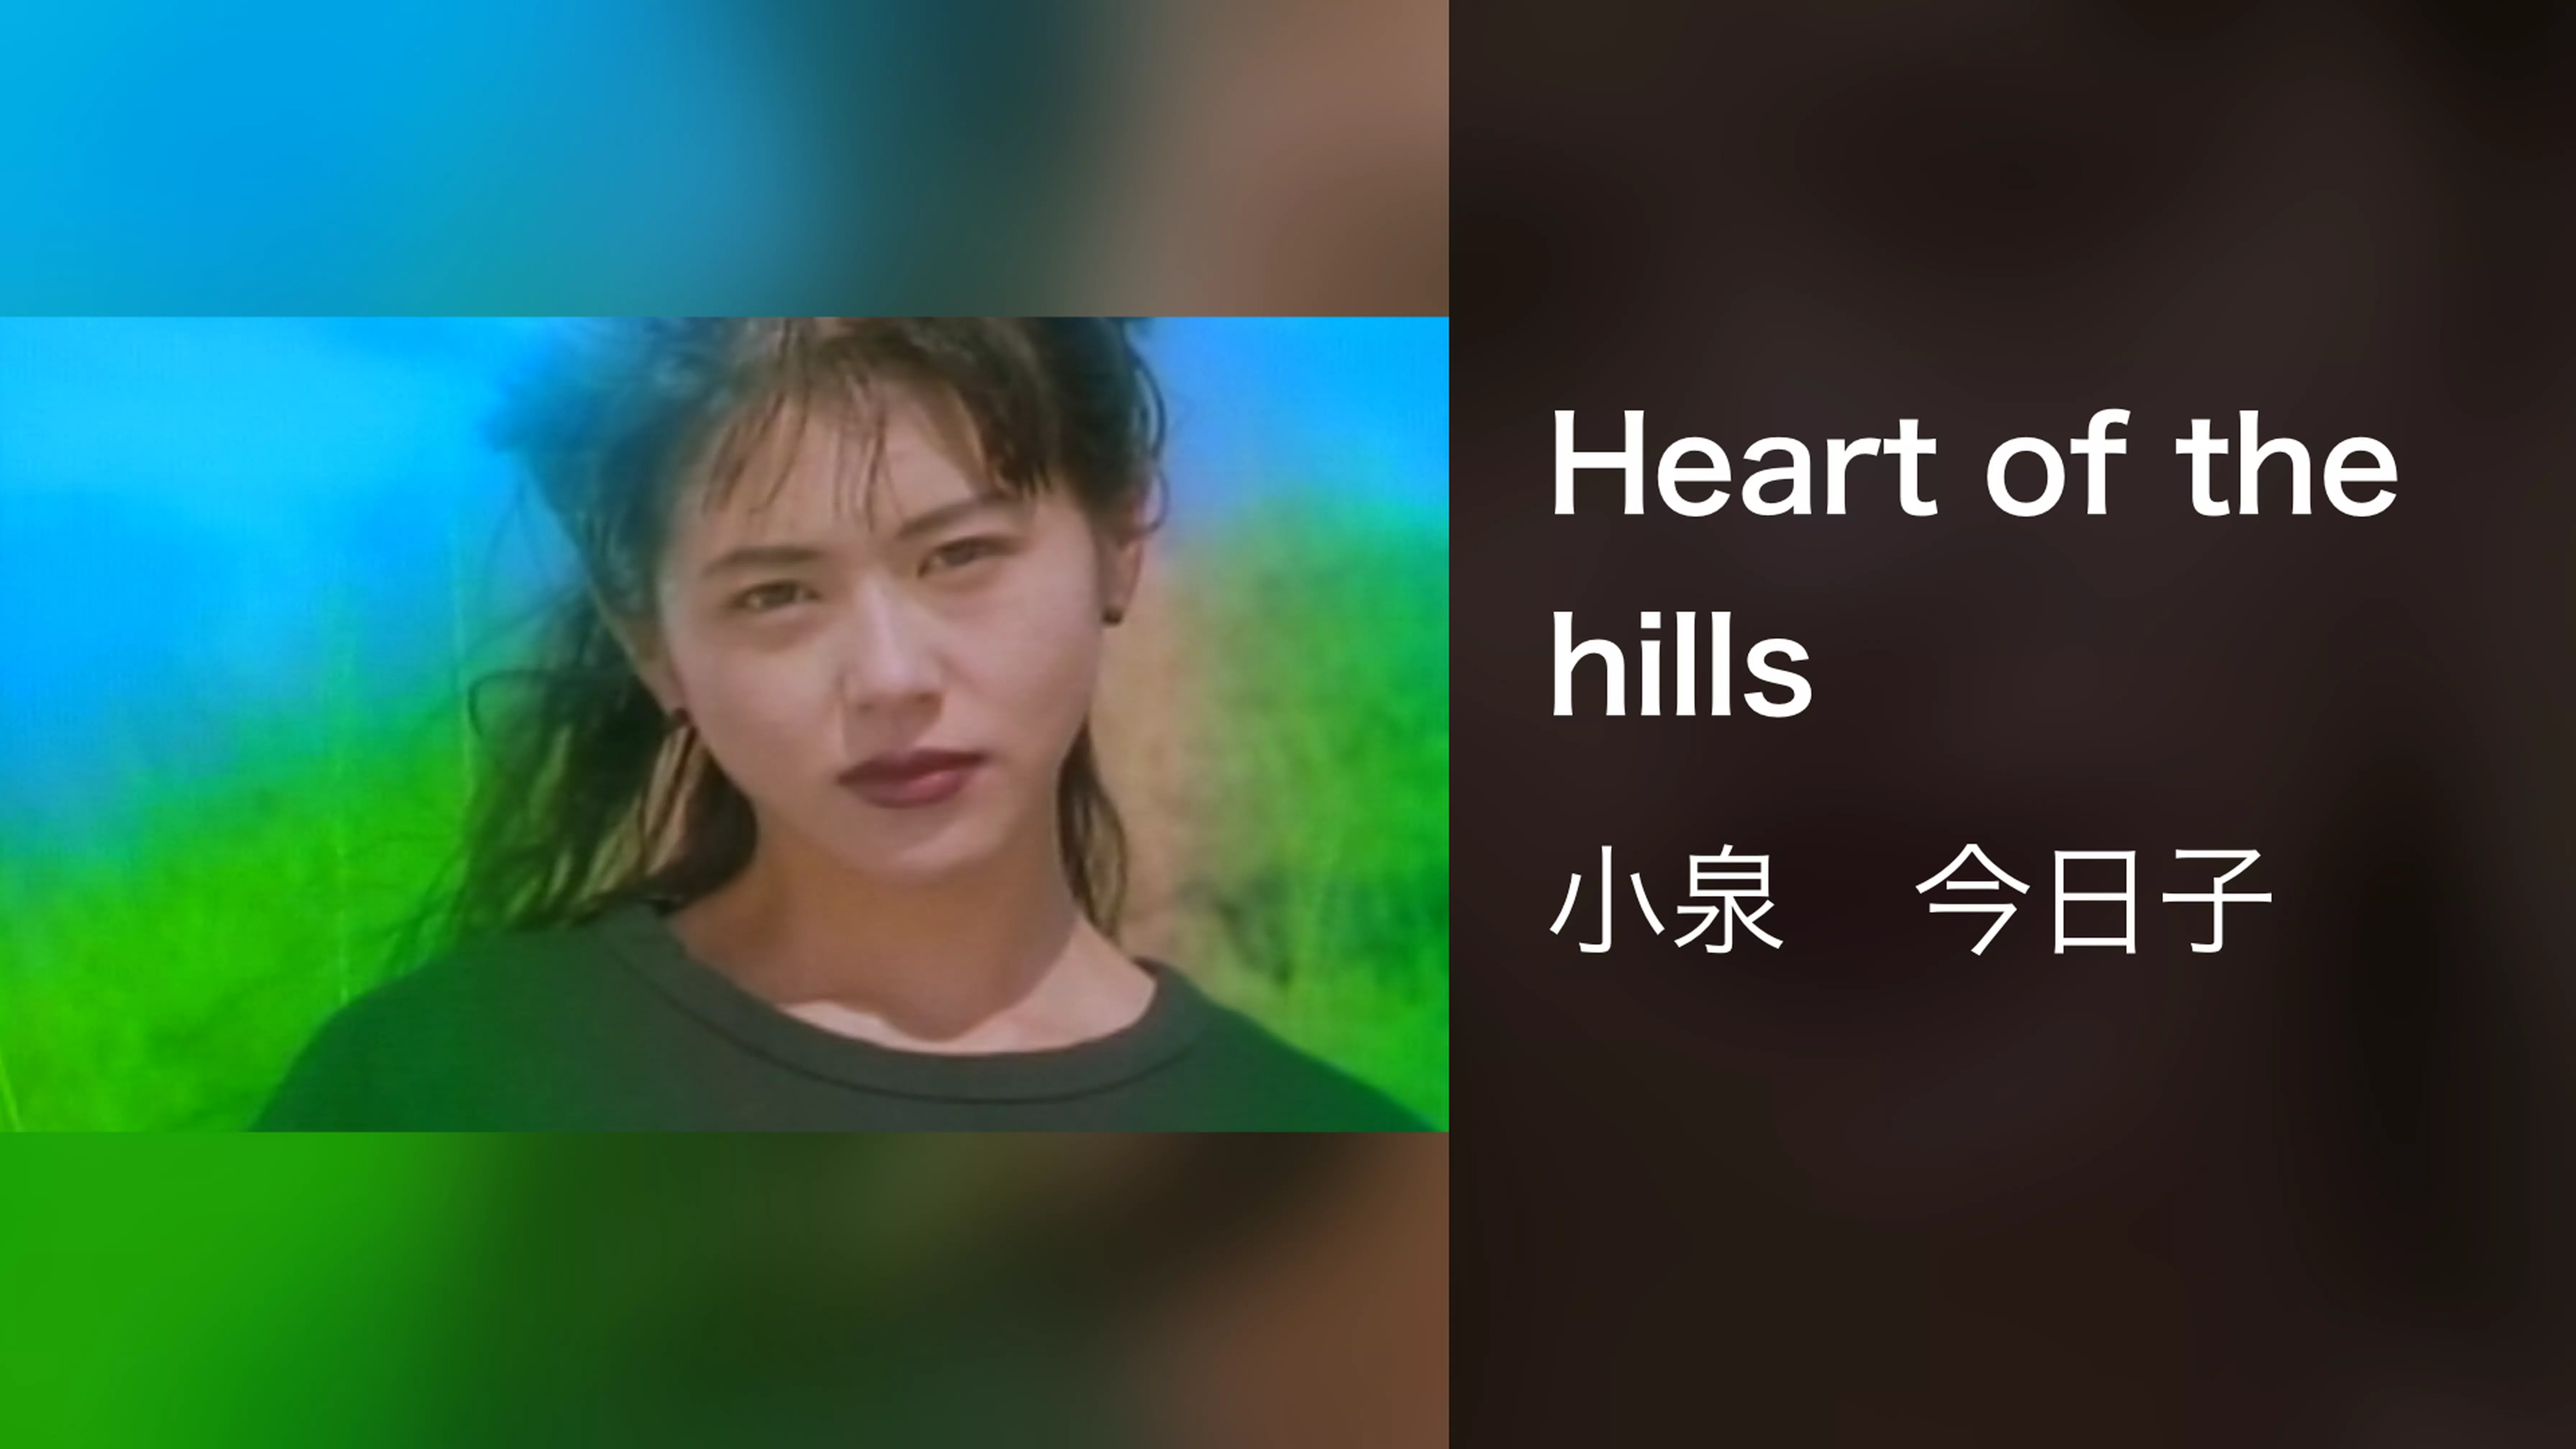 Heart of the hills